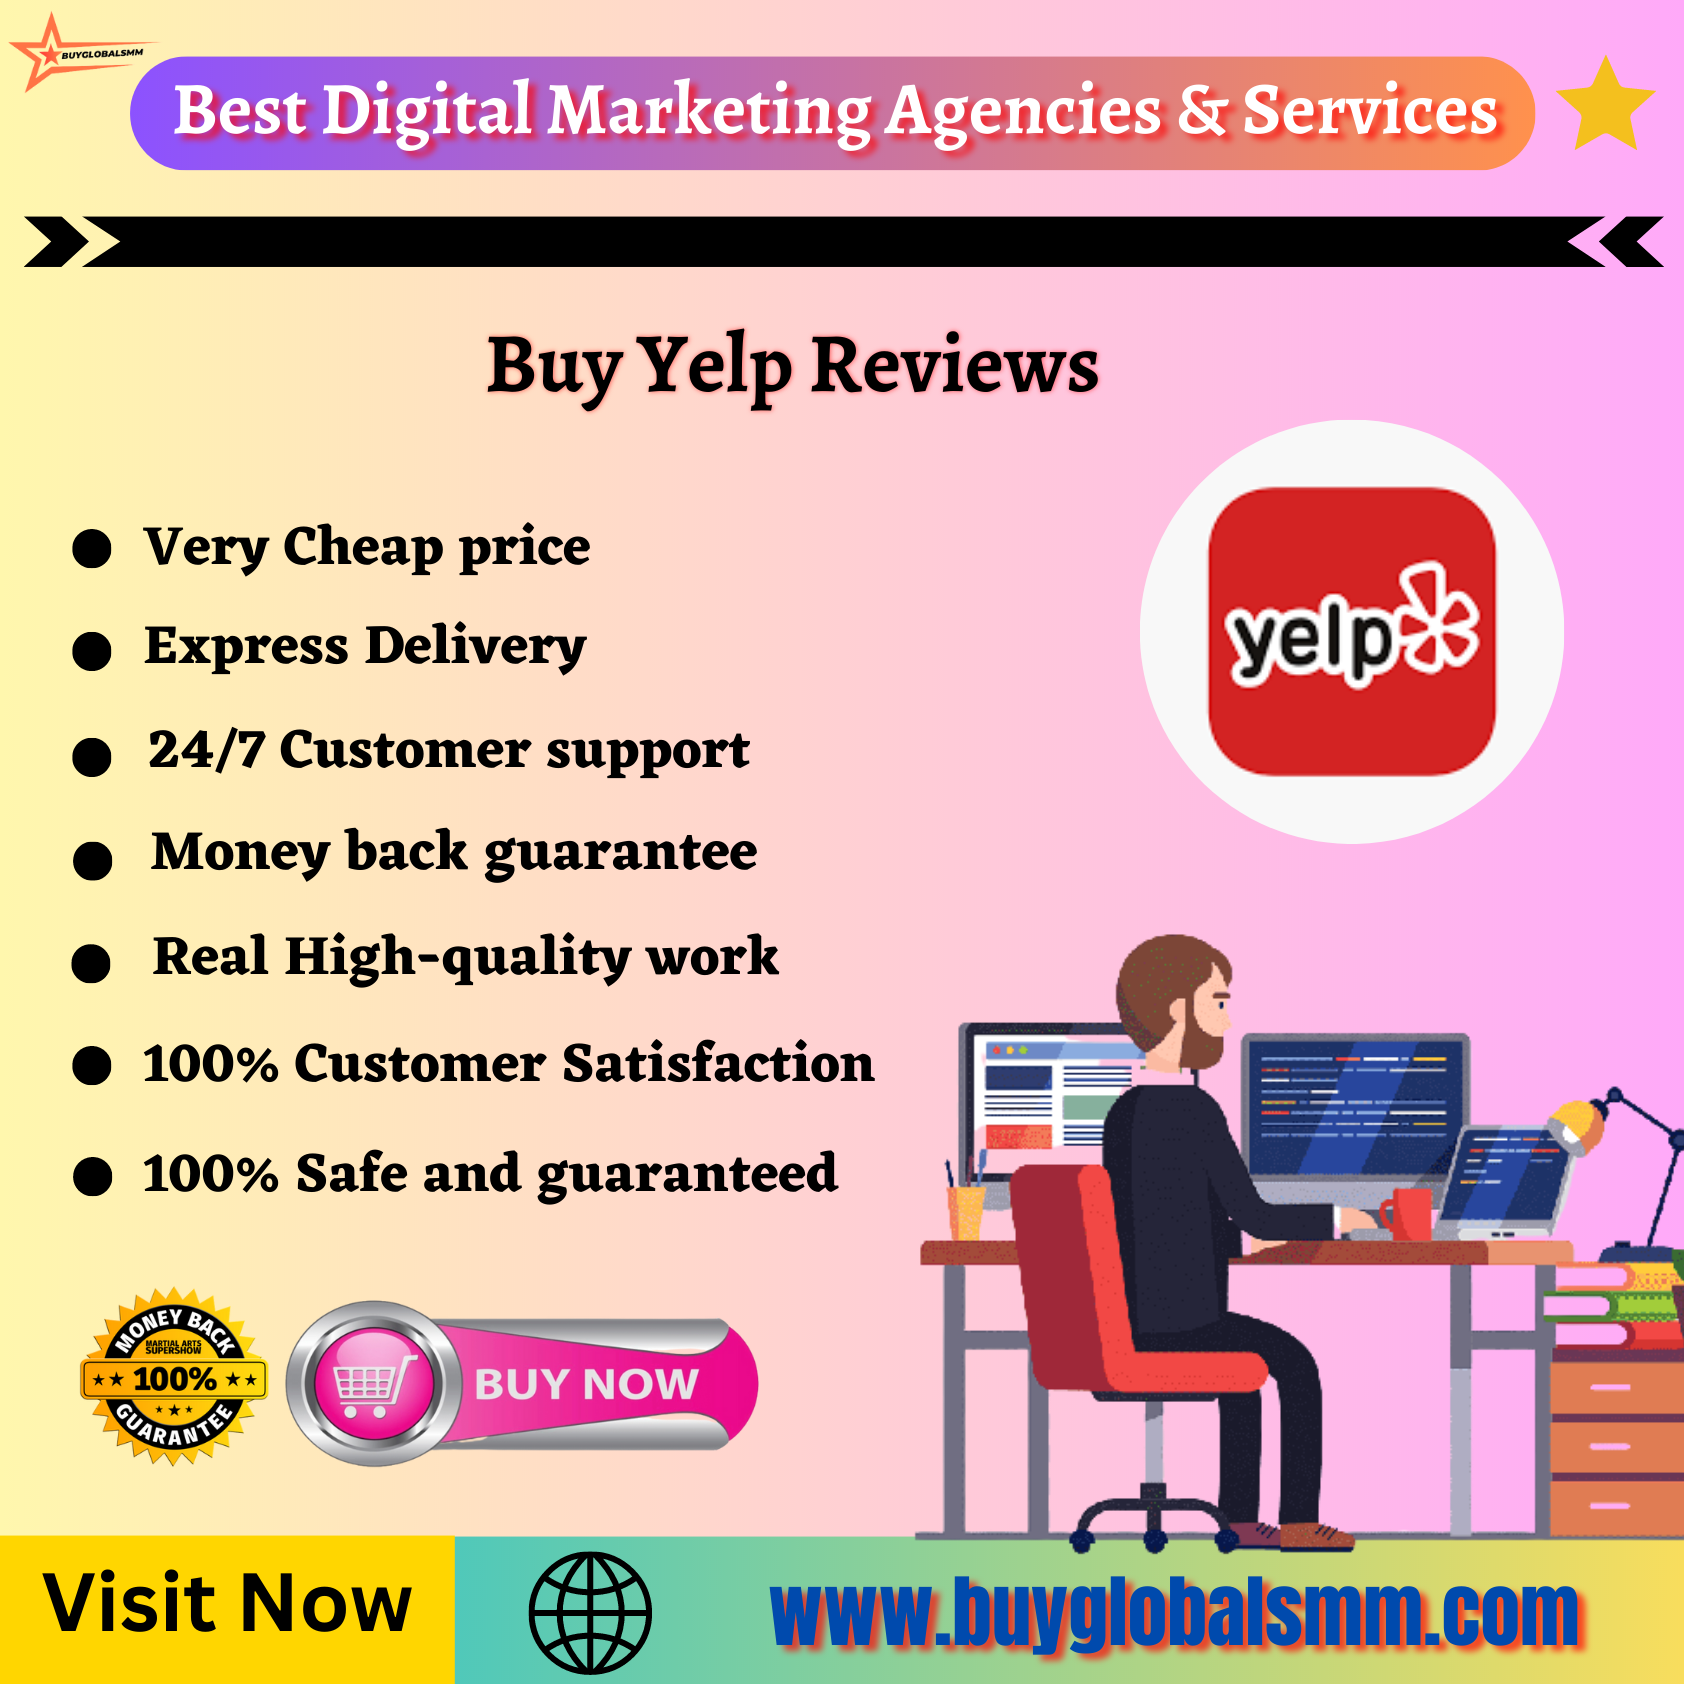 Buy Yelp Reviews-100% Email verified, & permanent reviews...